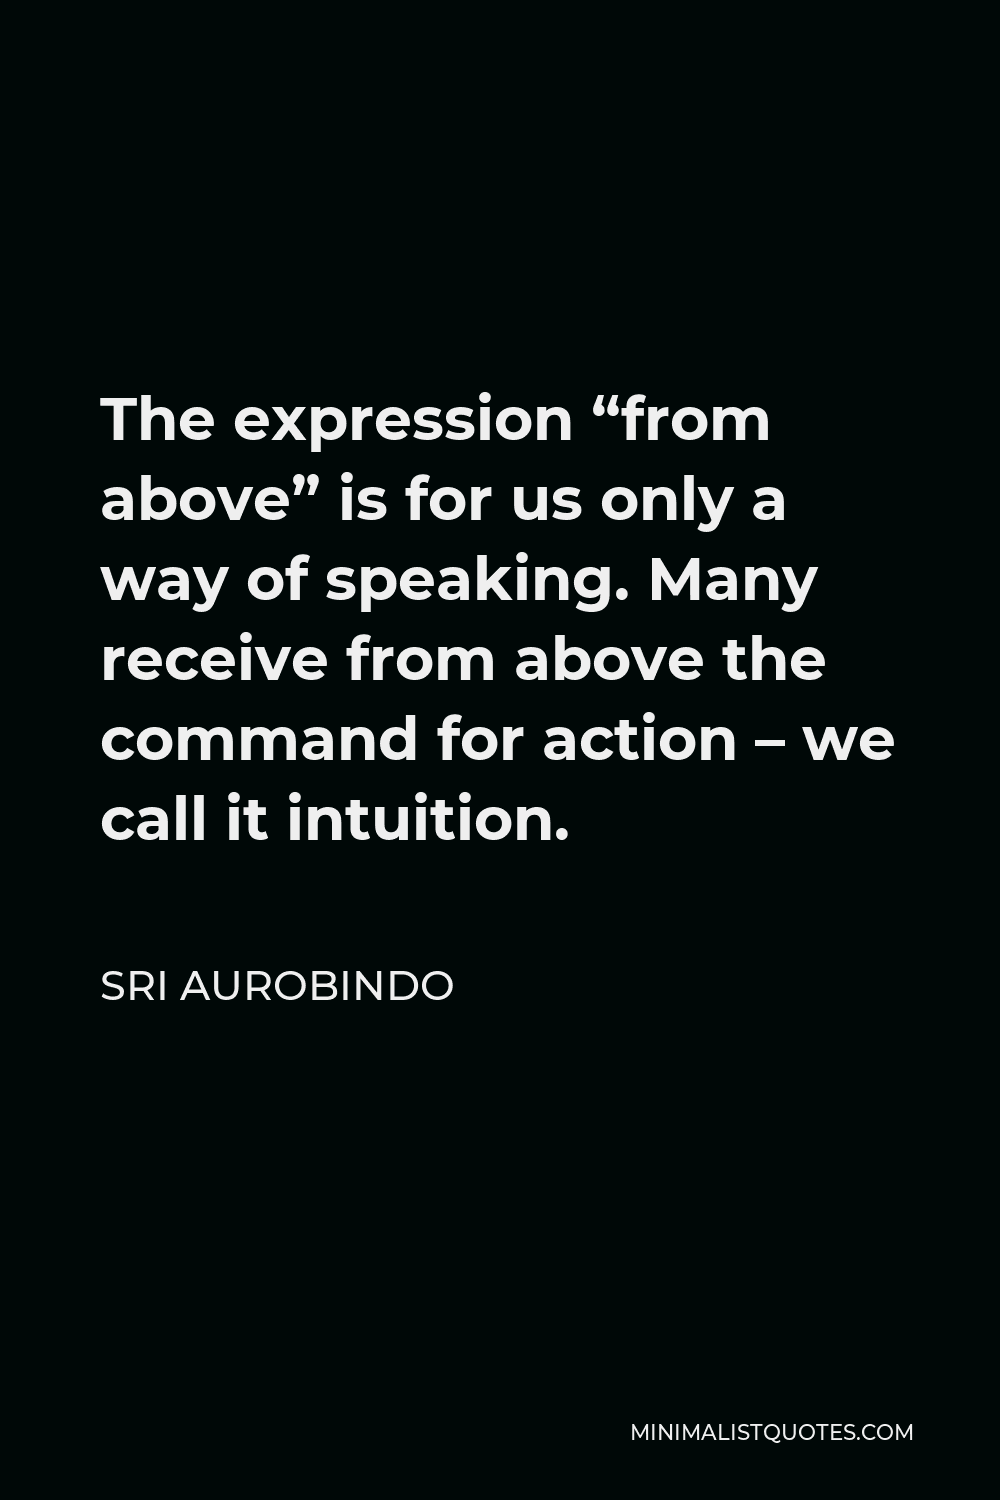 Sri Aurobindo Quote - The expression “from above” is for us only a way of speaking. Many receive from above the command for action – we call it intuition.